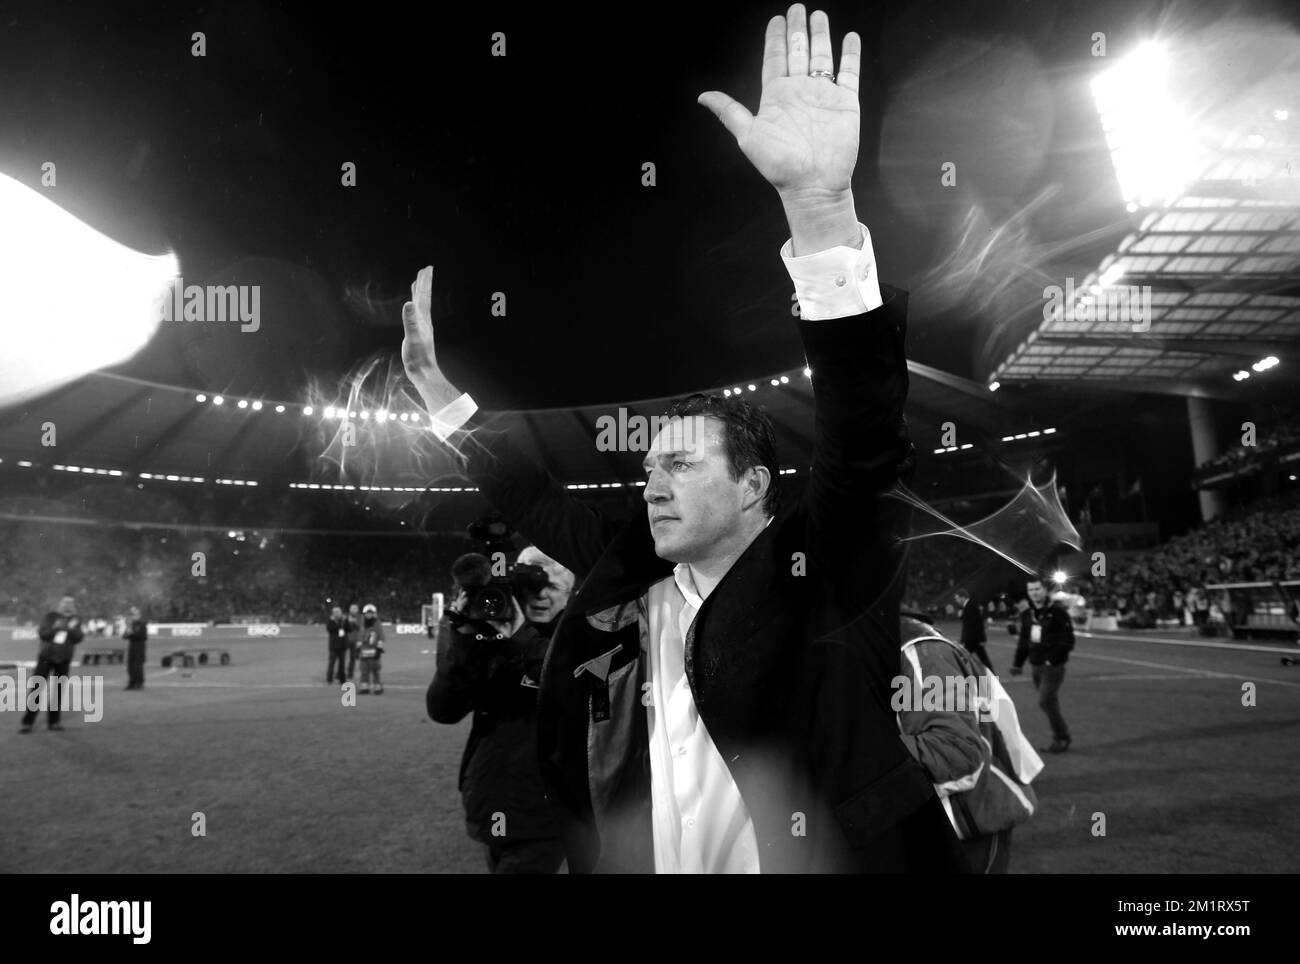 Belgium's head coach Marc Wilmots celebrates after a soccer game between Belgian national team The Red Devils and the Wales national team at the Koning Boudewijn Stadion - Stade Roi Baudouin in Brussels, Tuesday 15 October 2013, the last qualification game for the 2014 FIFA World Cup. The Red Devils are qualified for the 2014 FIFA World Cup in Brazil as group leader.   Stock Photo